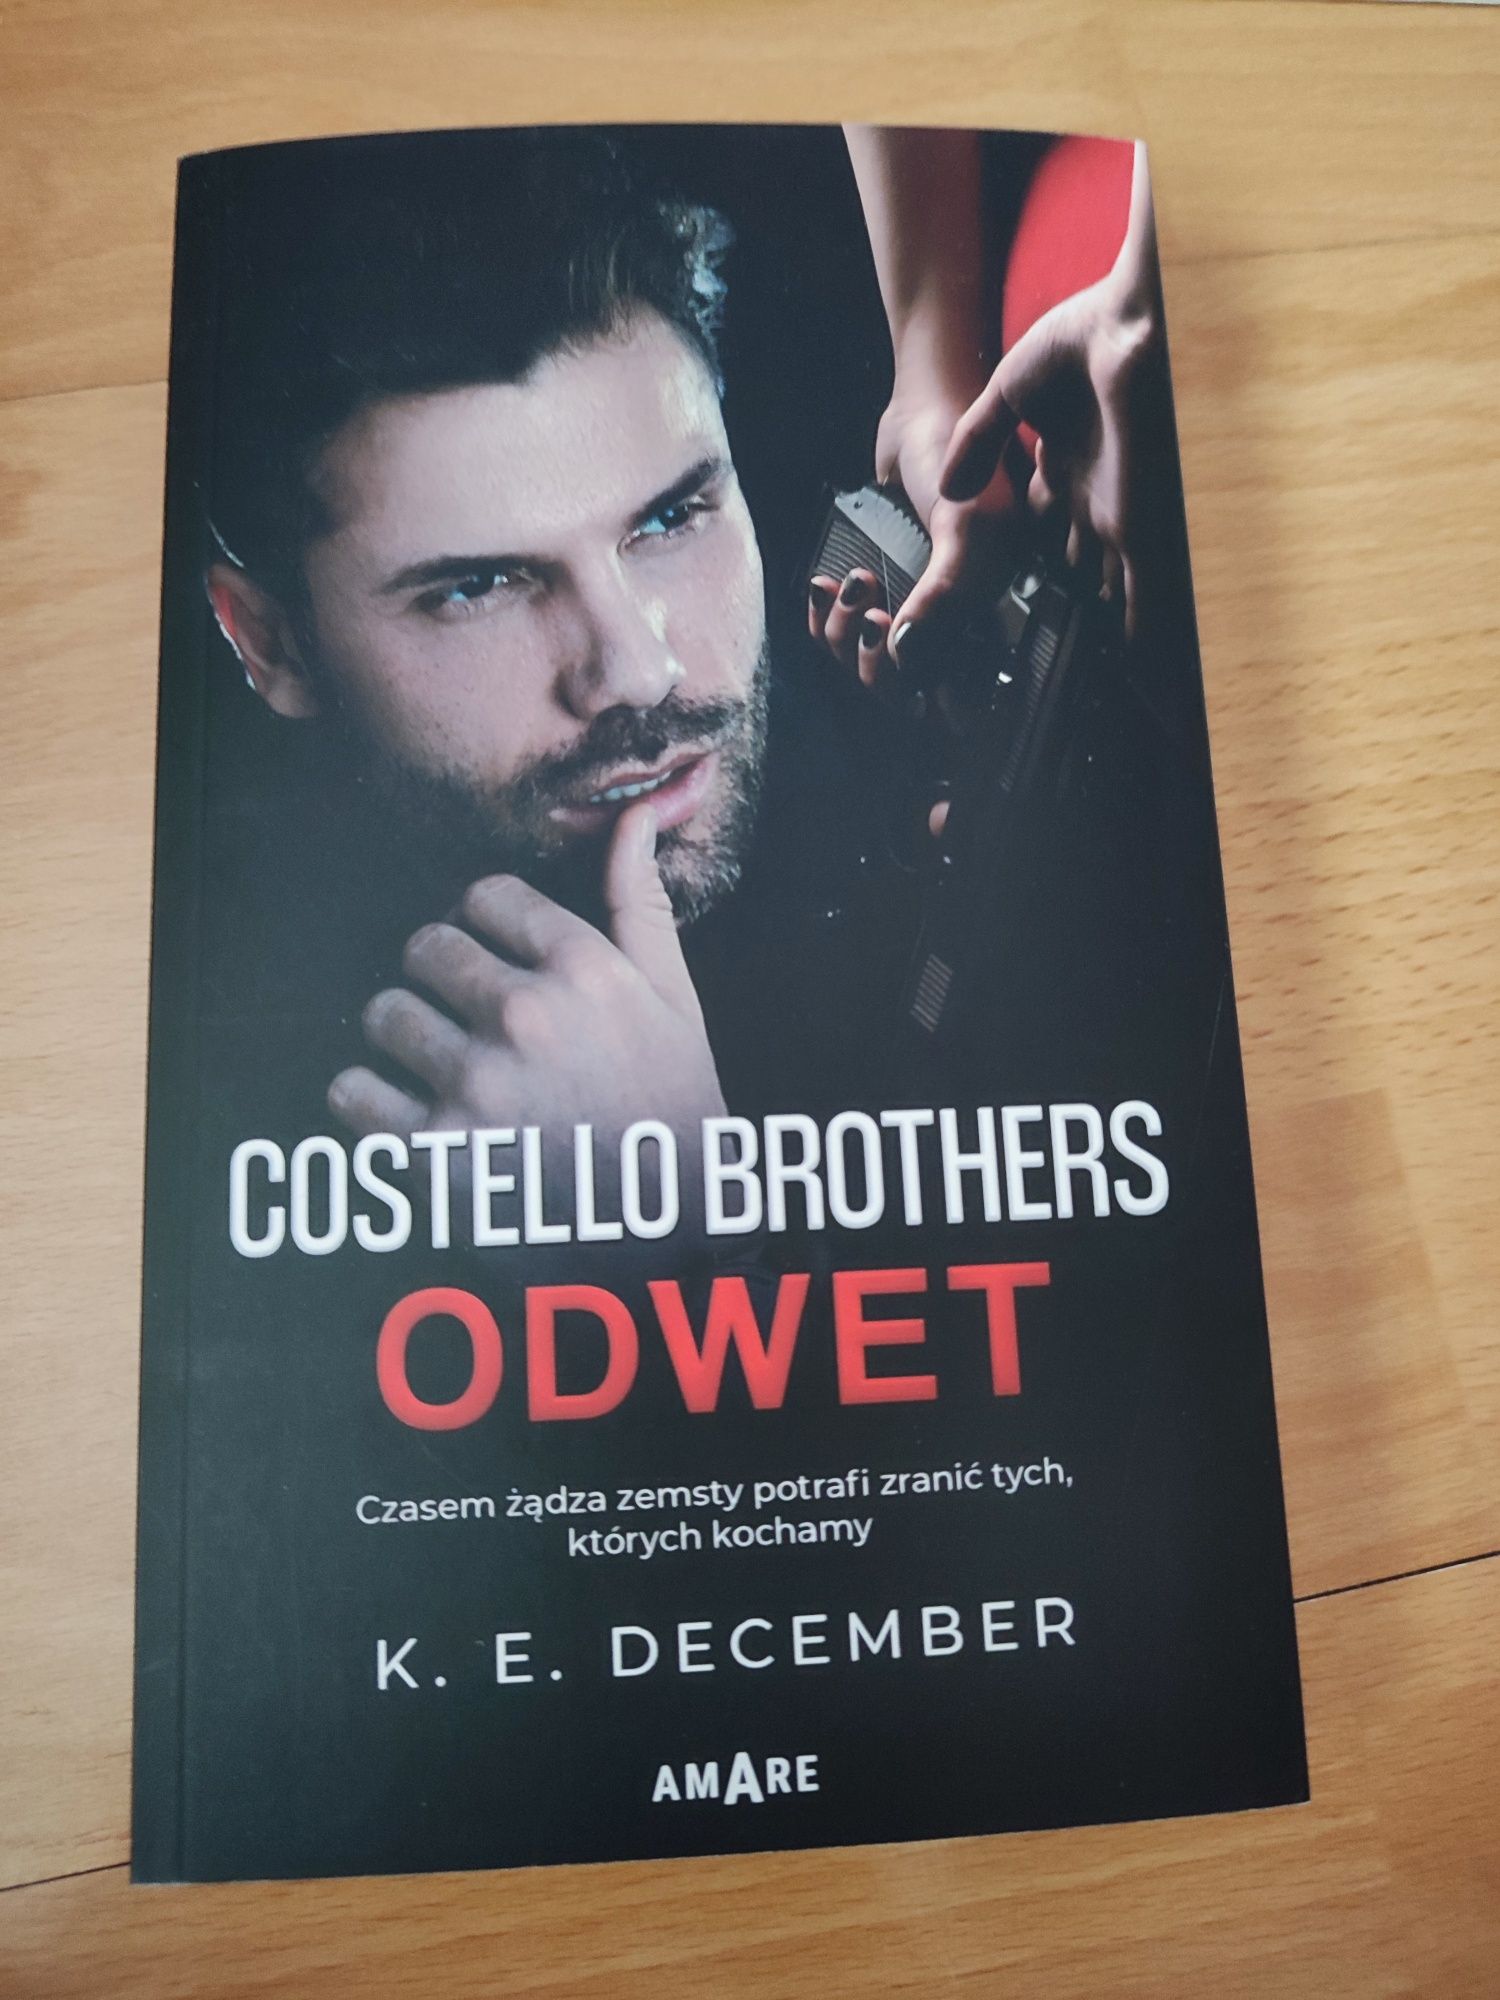 K.E. December -"costello brothers -odwet"